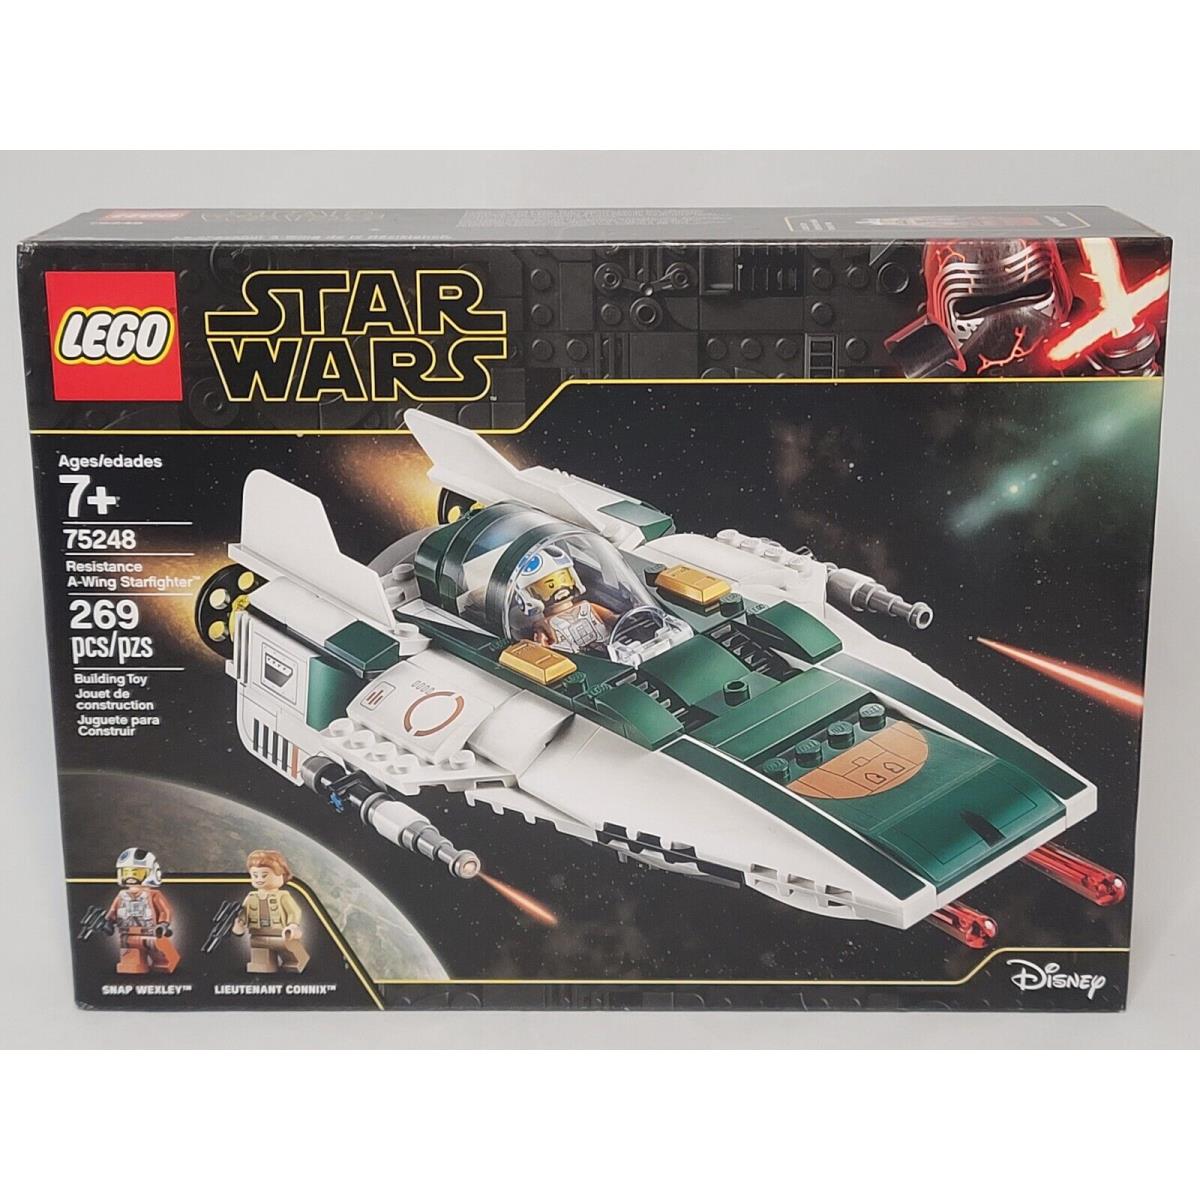 Lego 75248 Resistance A-wing Starfighter Star Wars Snap Wexley Lieutenant Connix